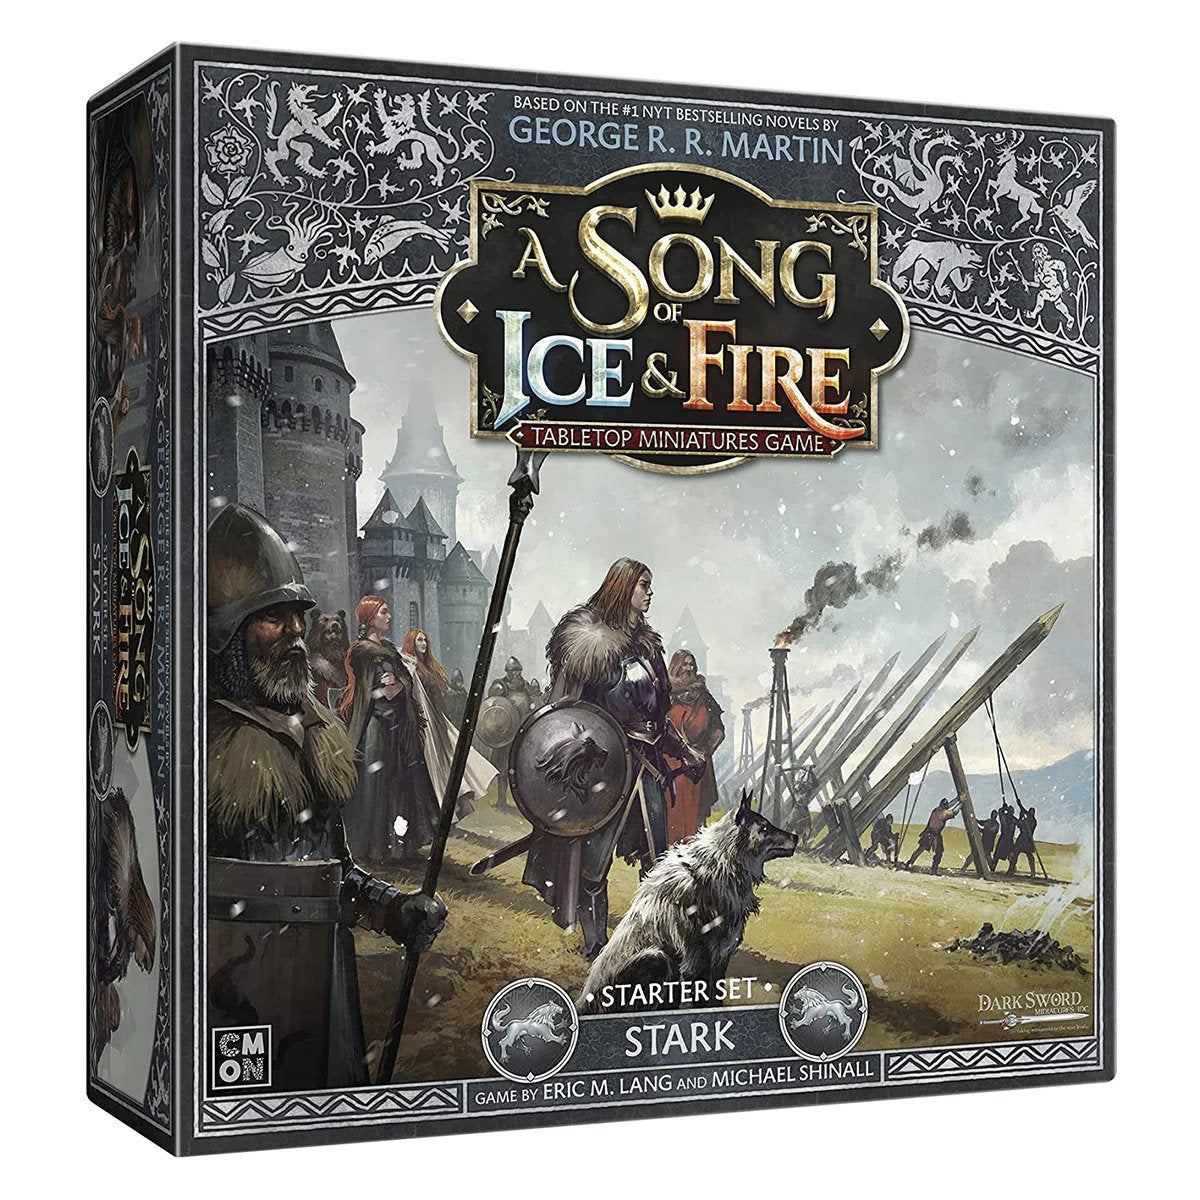 Set Permulaan Song of Ice and Fire Stark